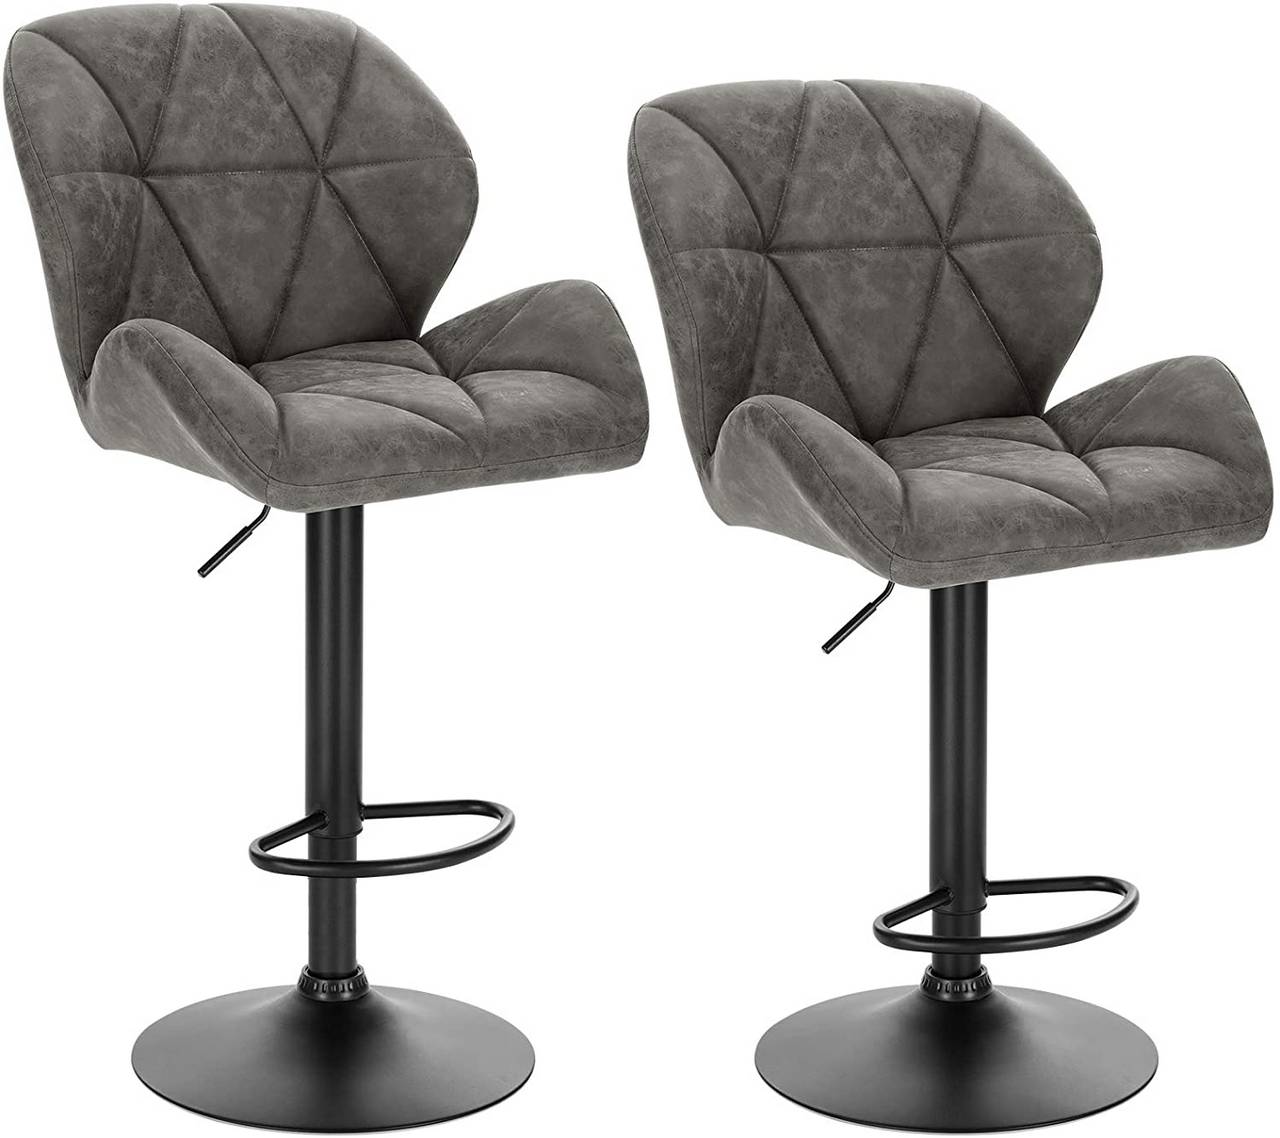 Set of 2 bar backrest of counter bistro leather stools, stools stools, made imitation with